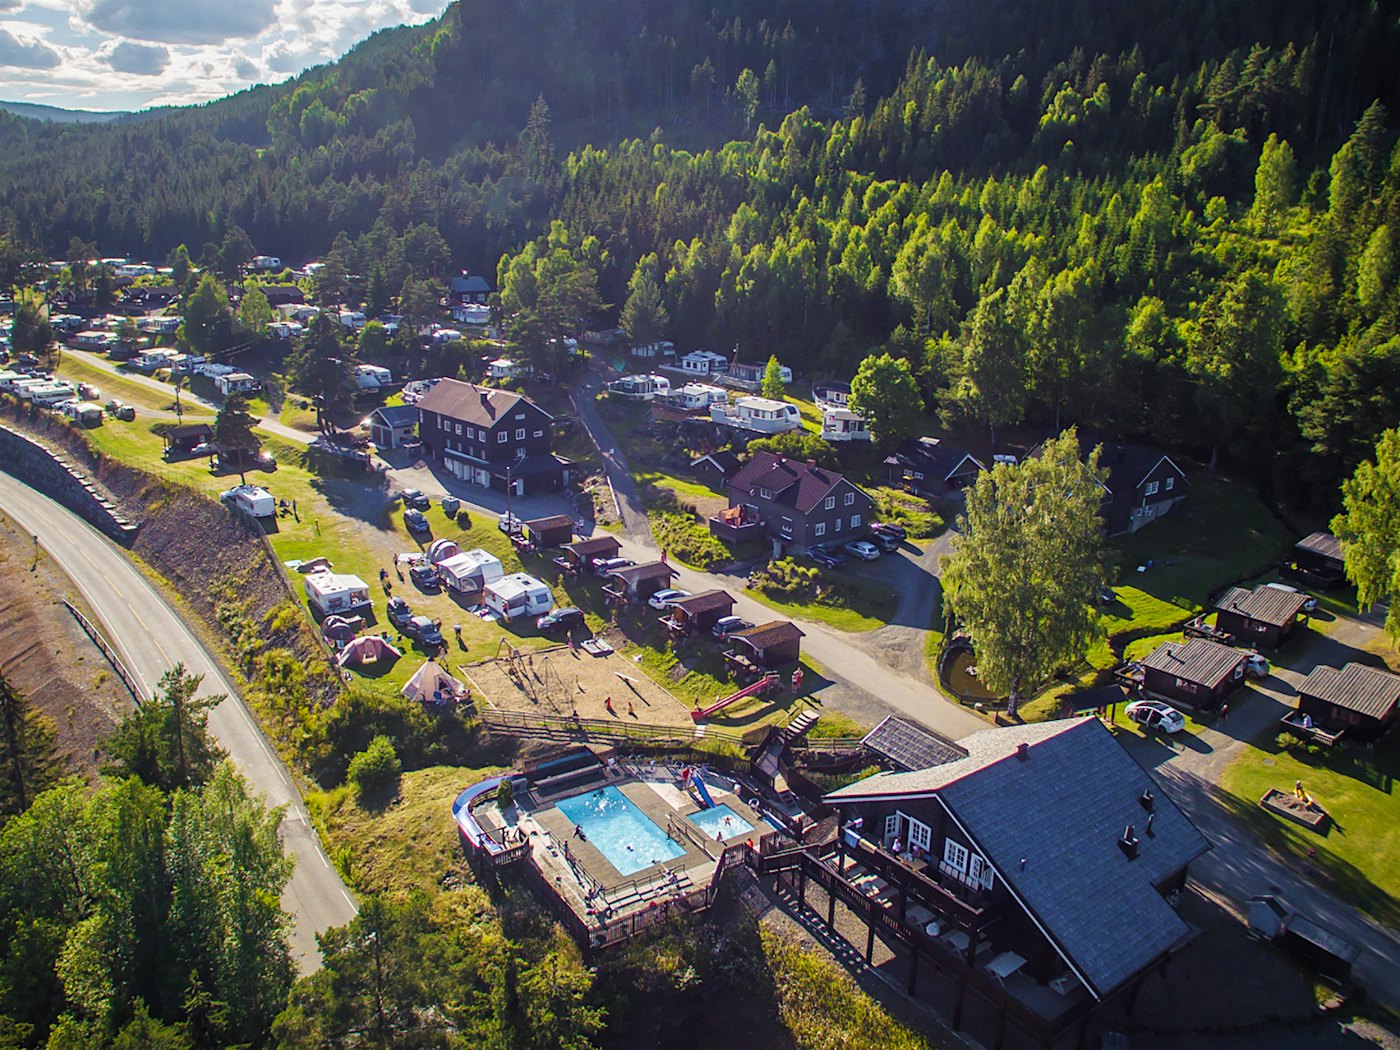 drone image of the restaurant, pool area, playground, cabins and camping pitches